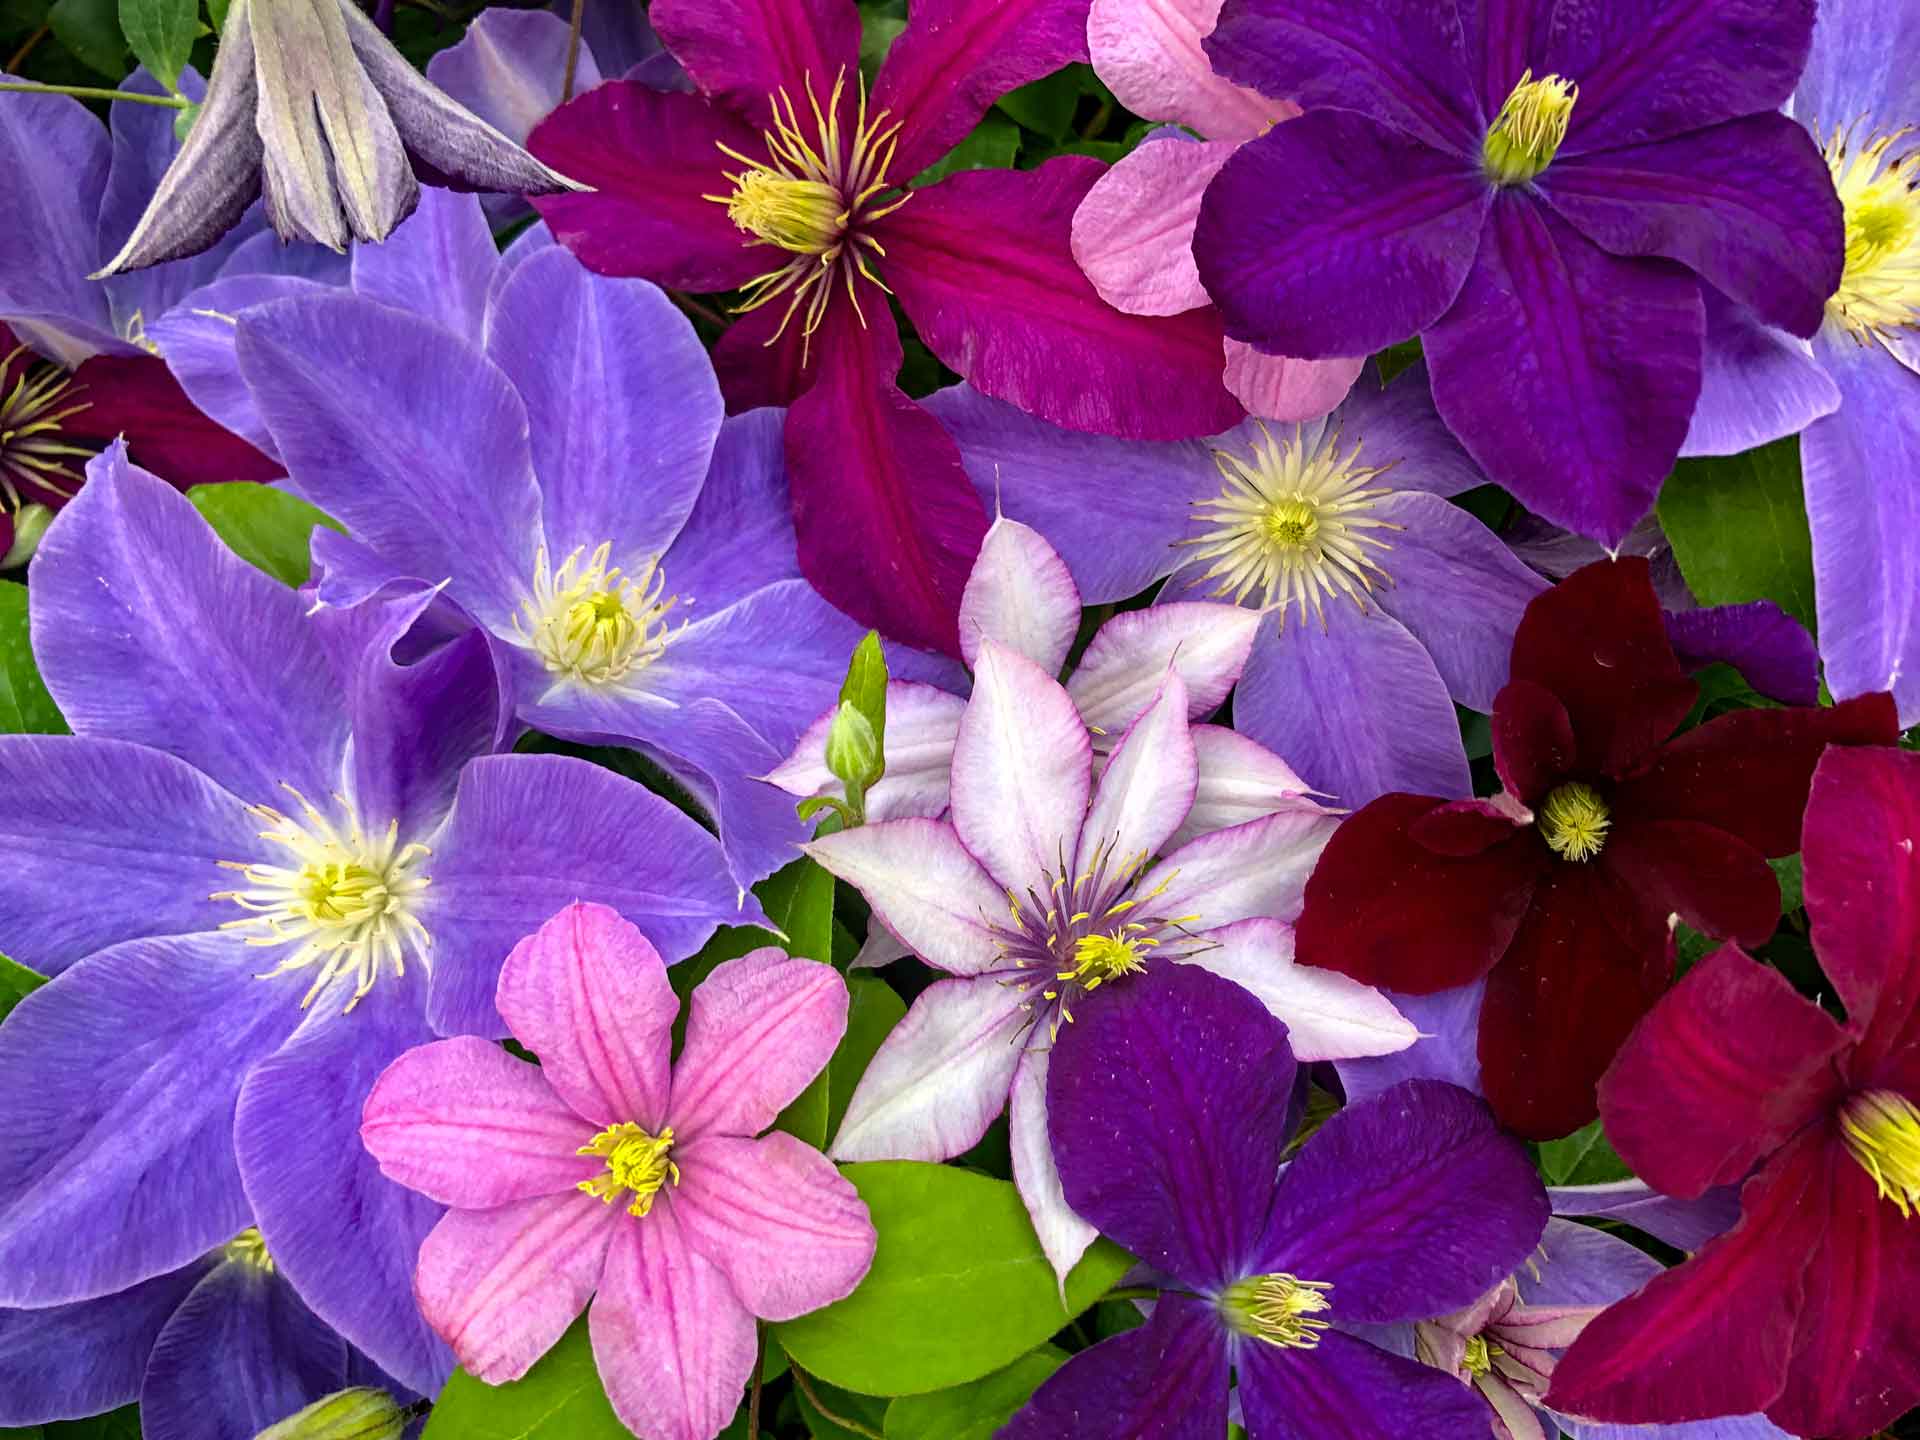 Assorted Clematis flowers from Donahue's Greenhouse